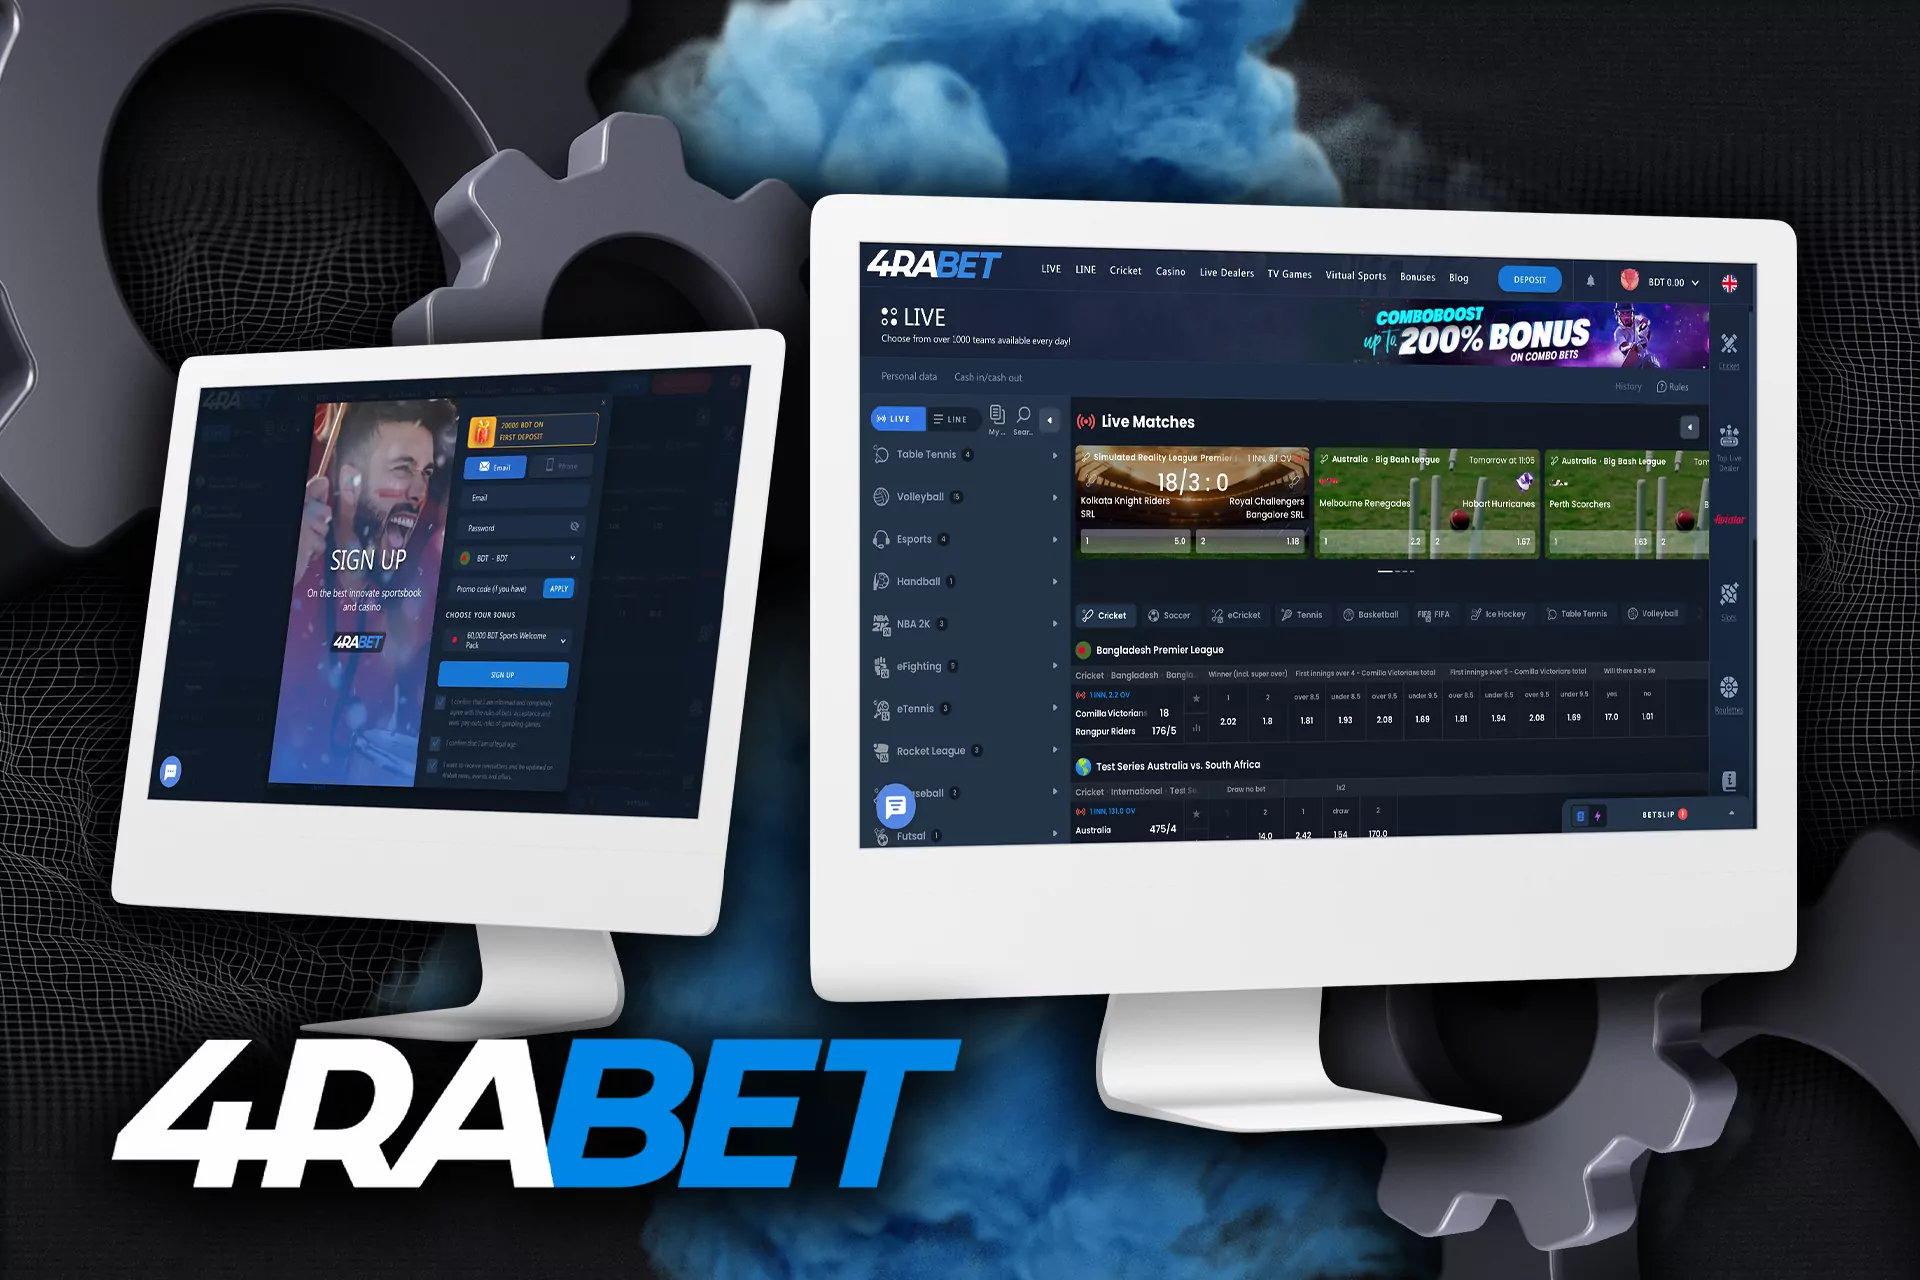 There are a lot of useful features that you can get betting via yout PC.